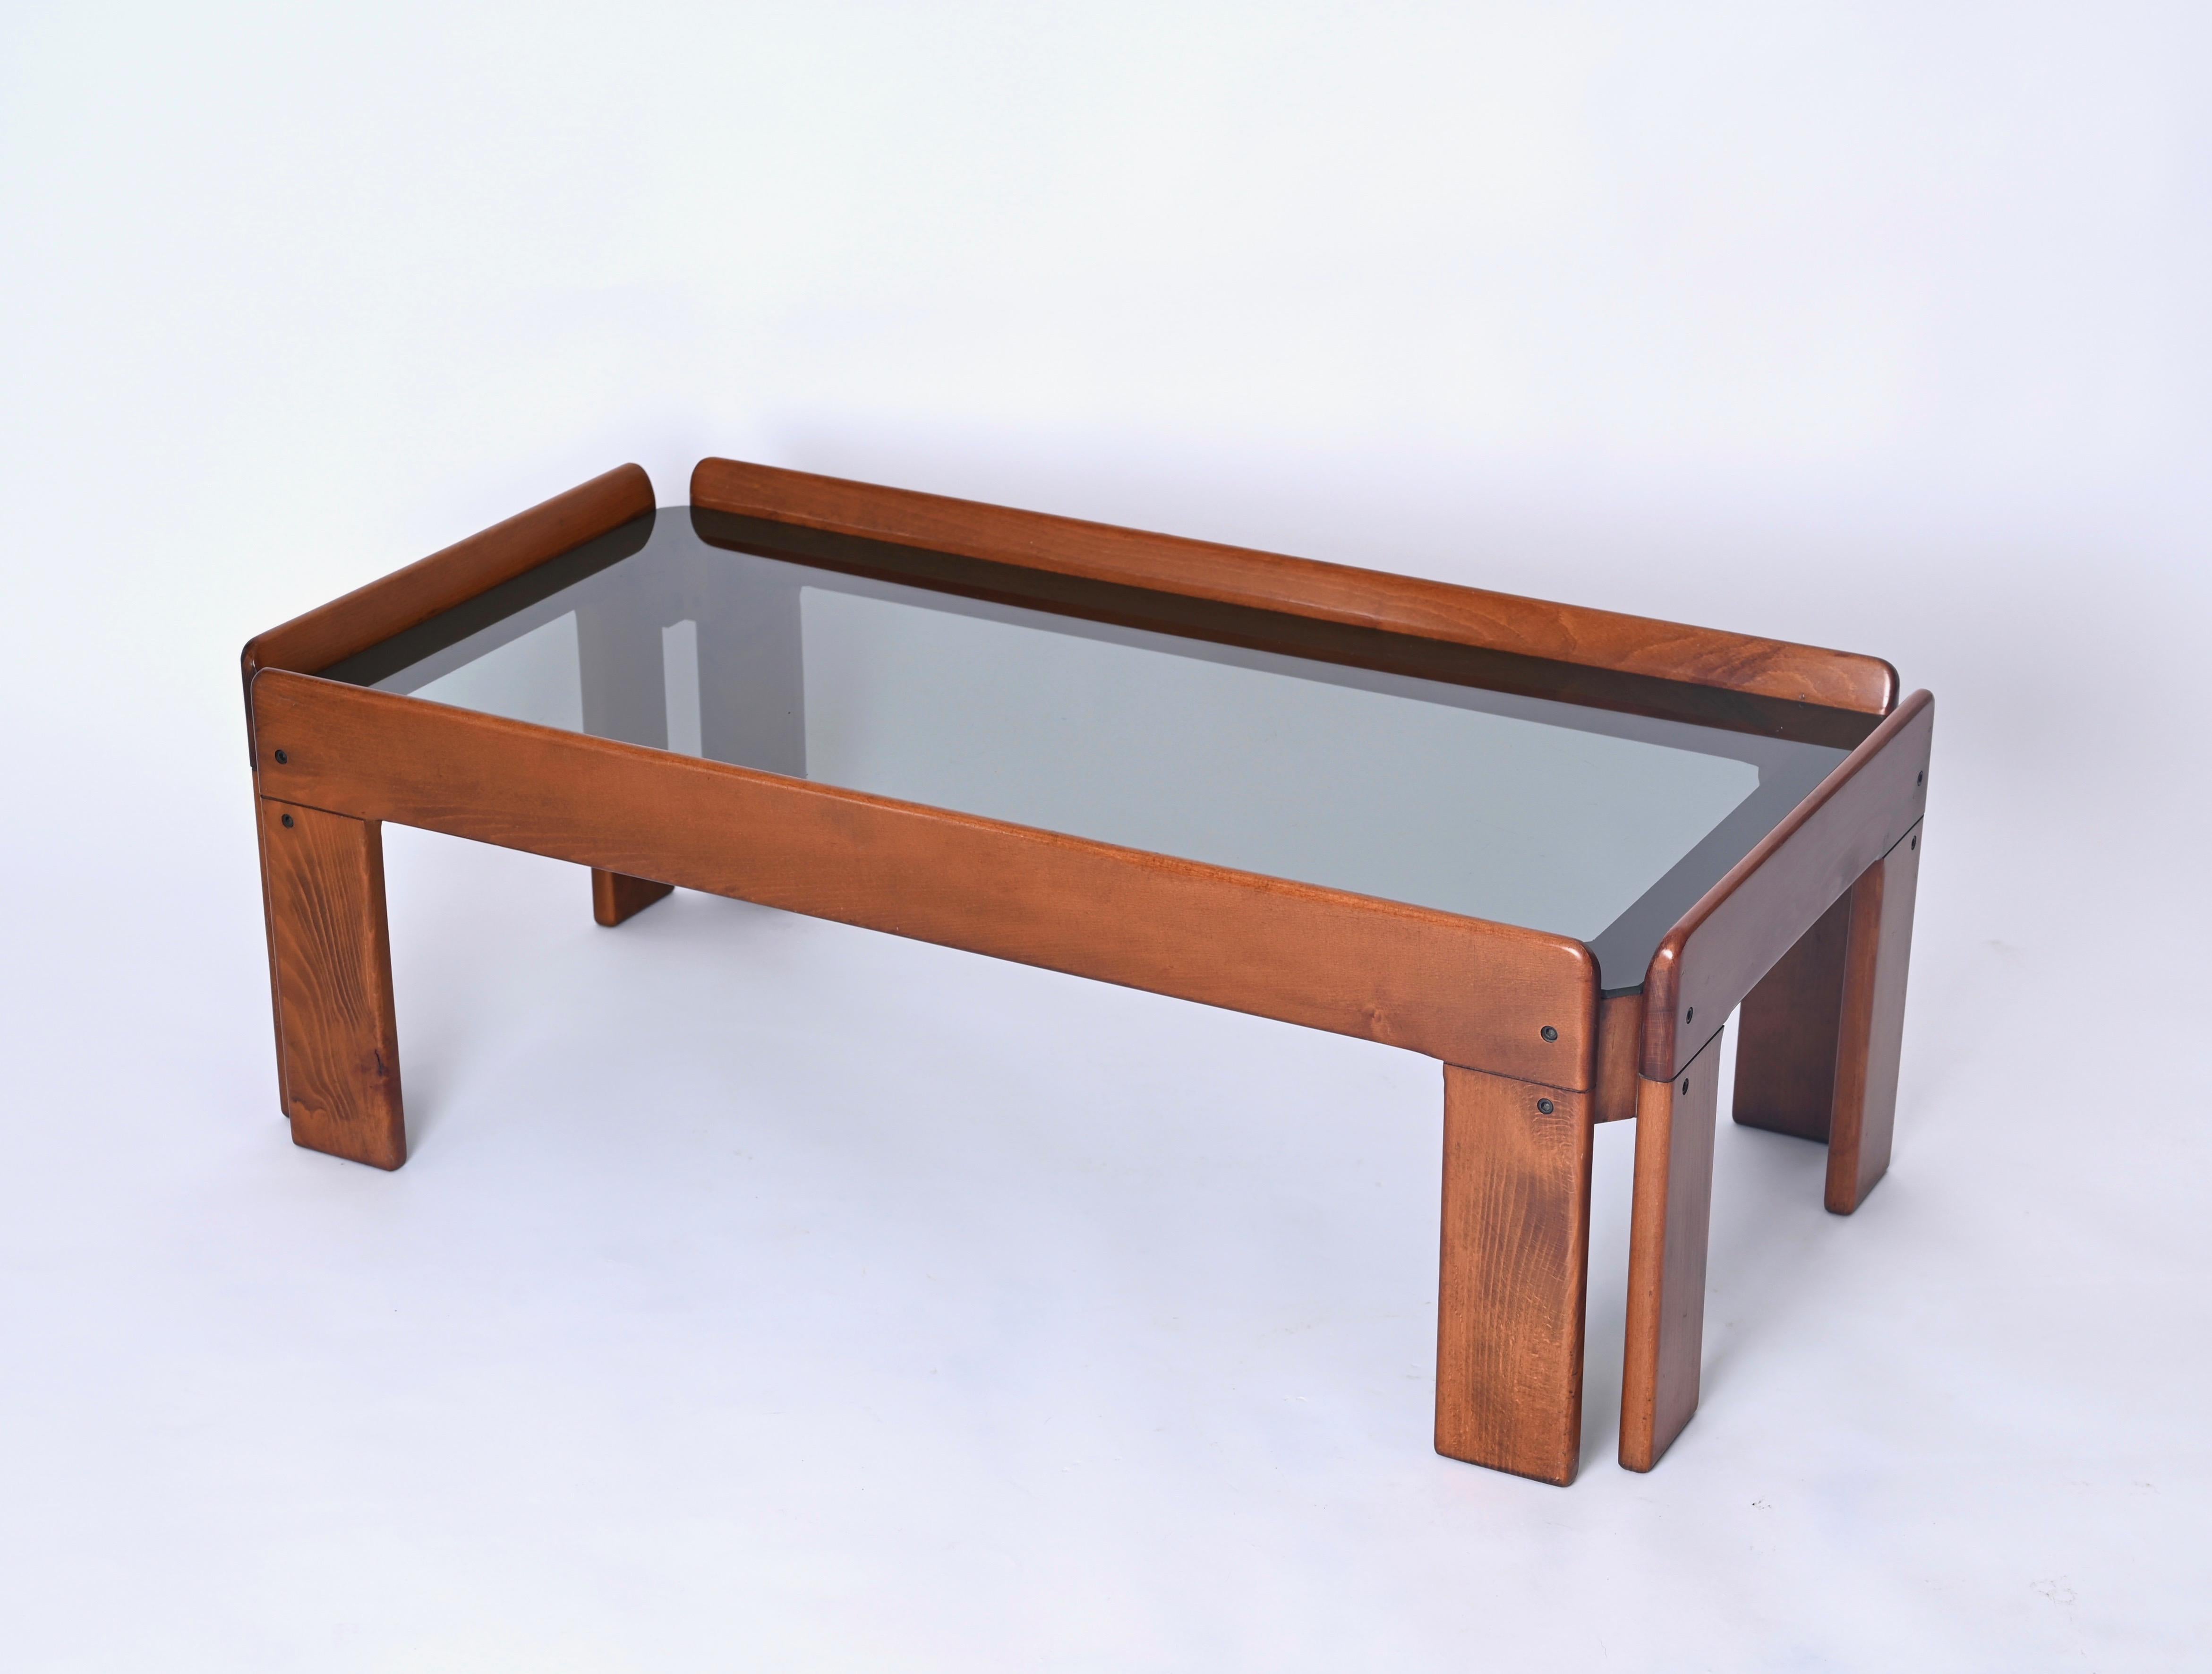 Afra & Tobia Scarpa Mid-Century Walnut Coffee Table for Cassina, Italy 1960s For Sale 11